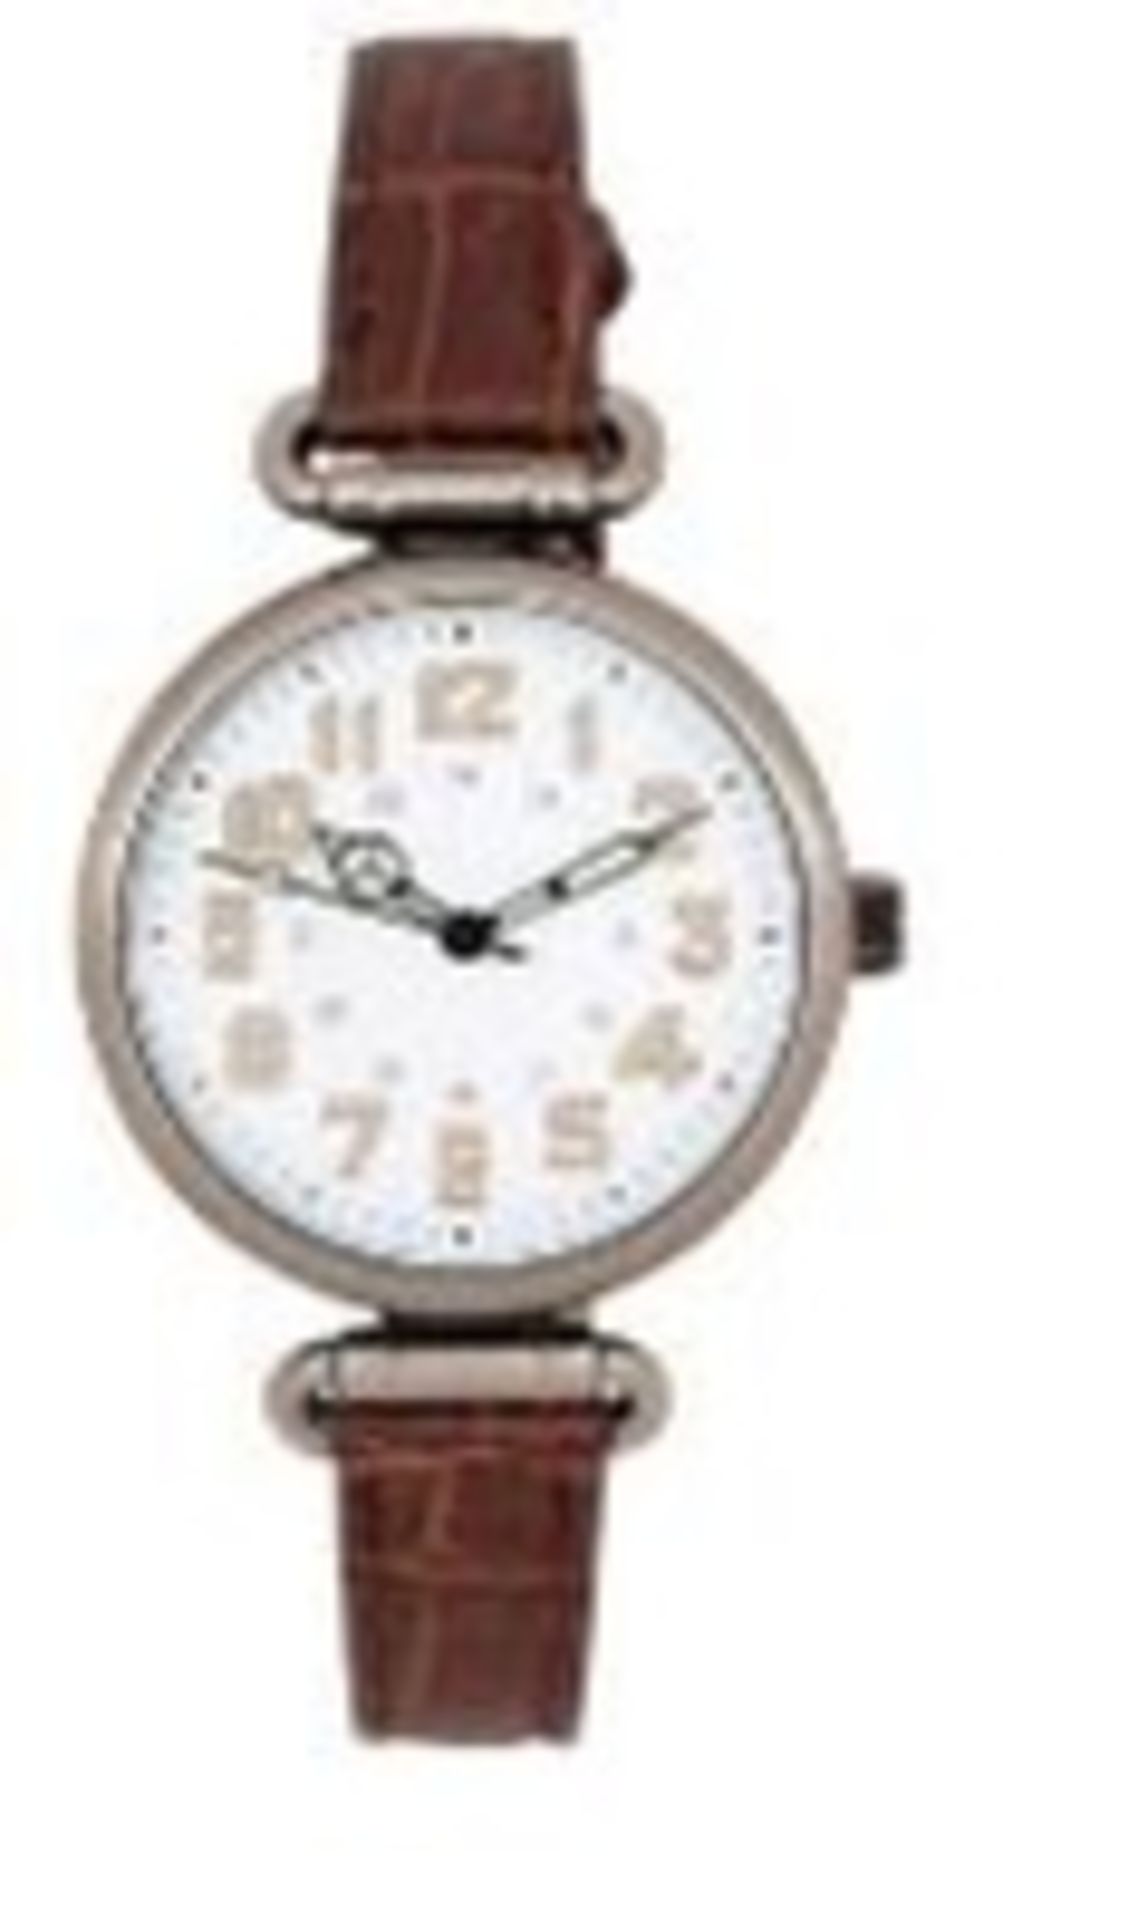 + VAT Brand New Gents 1910s American Soldiers Watch With Engraved Back In Presentation Box